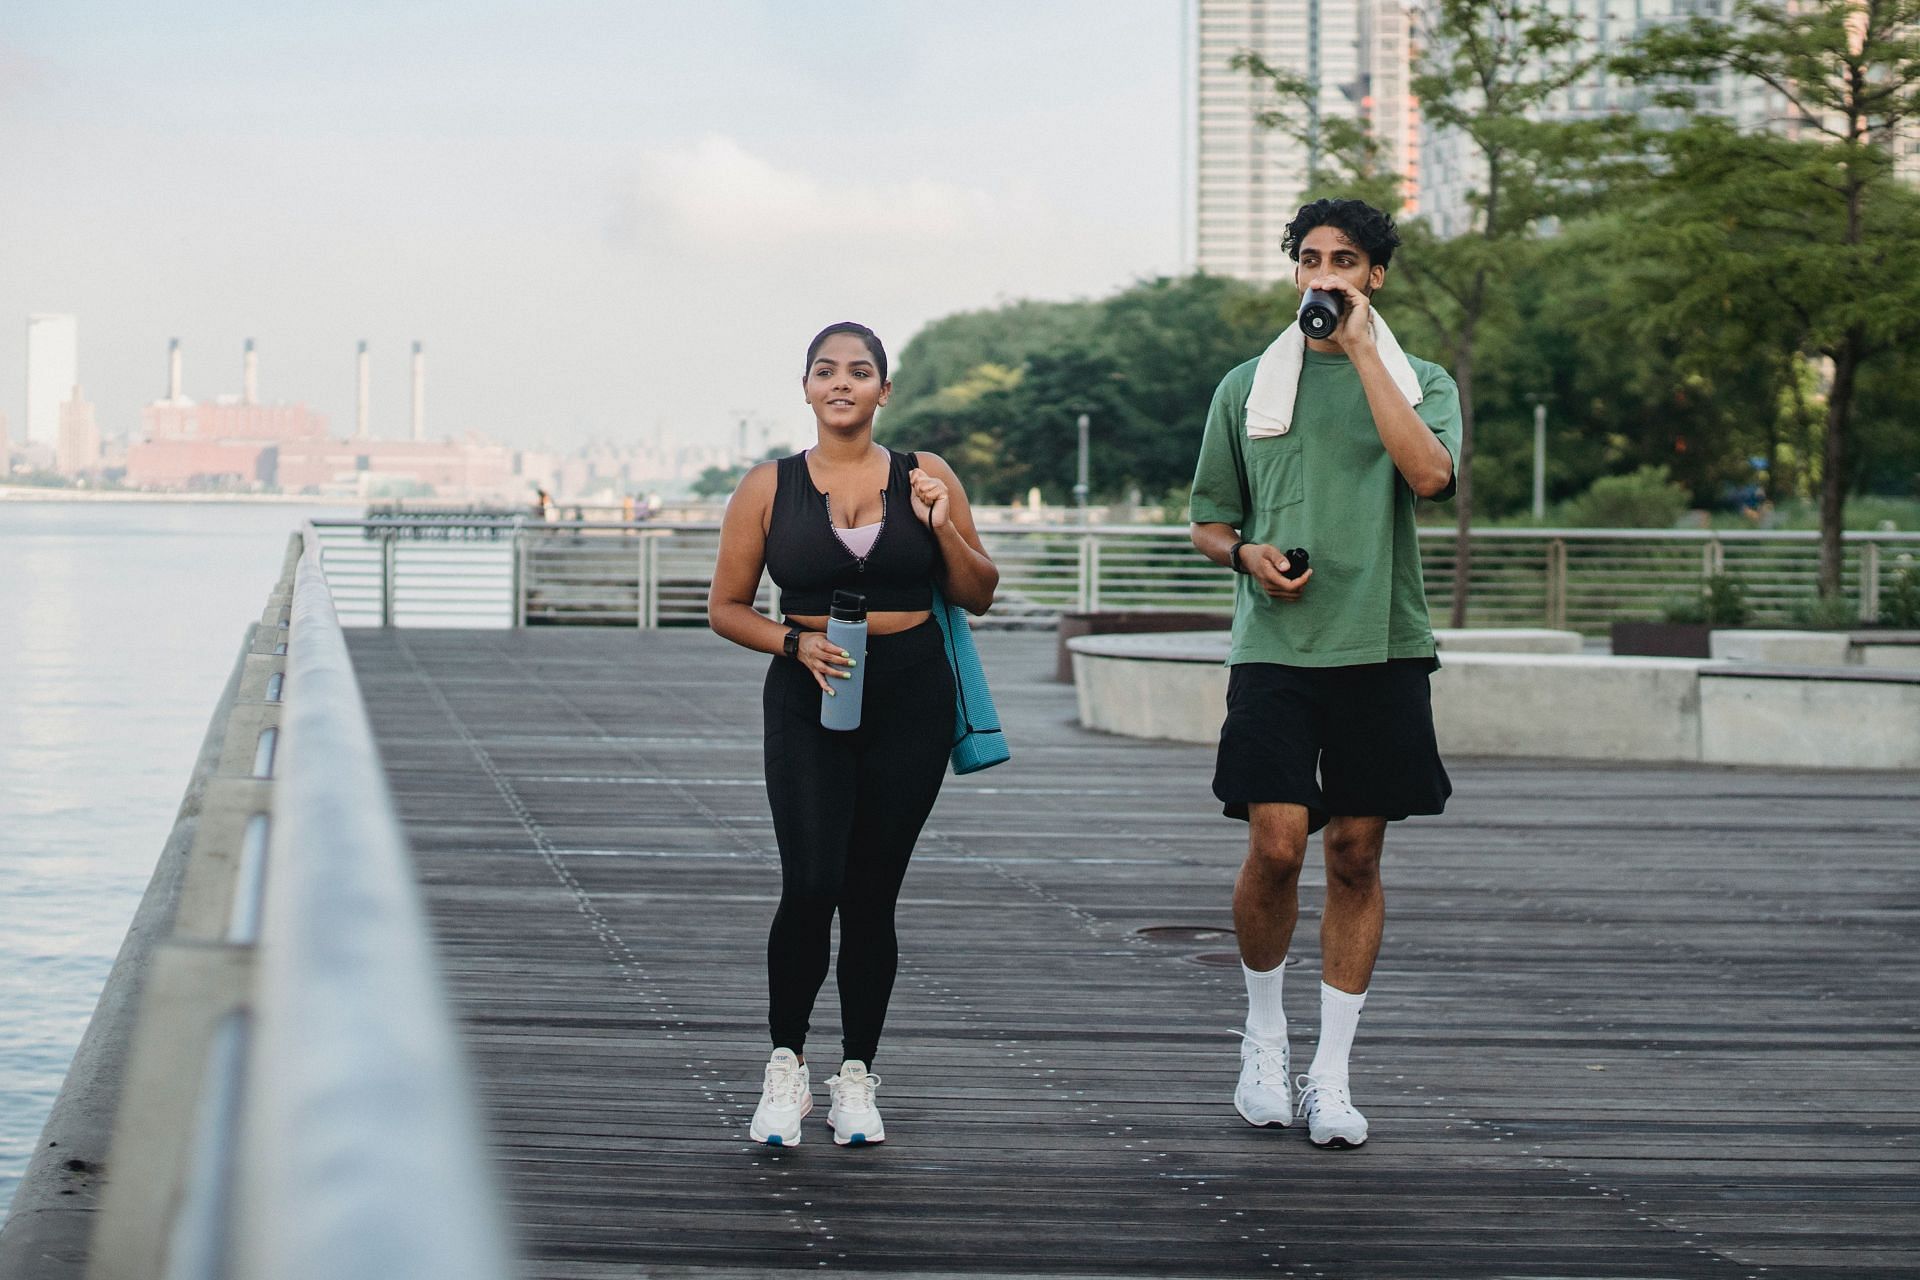 Importance of jogging for women (image sourced via Pexels / Photo by Ketut)